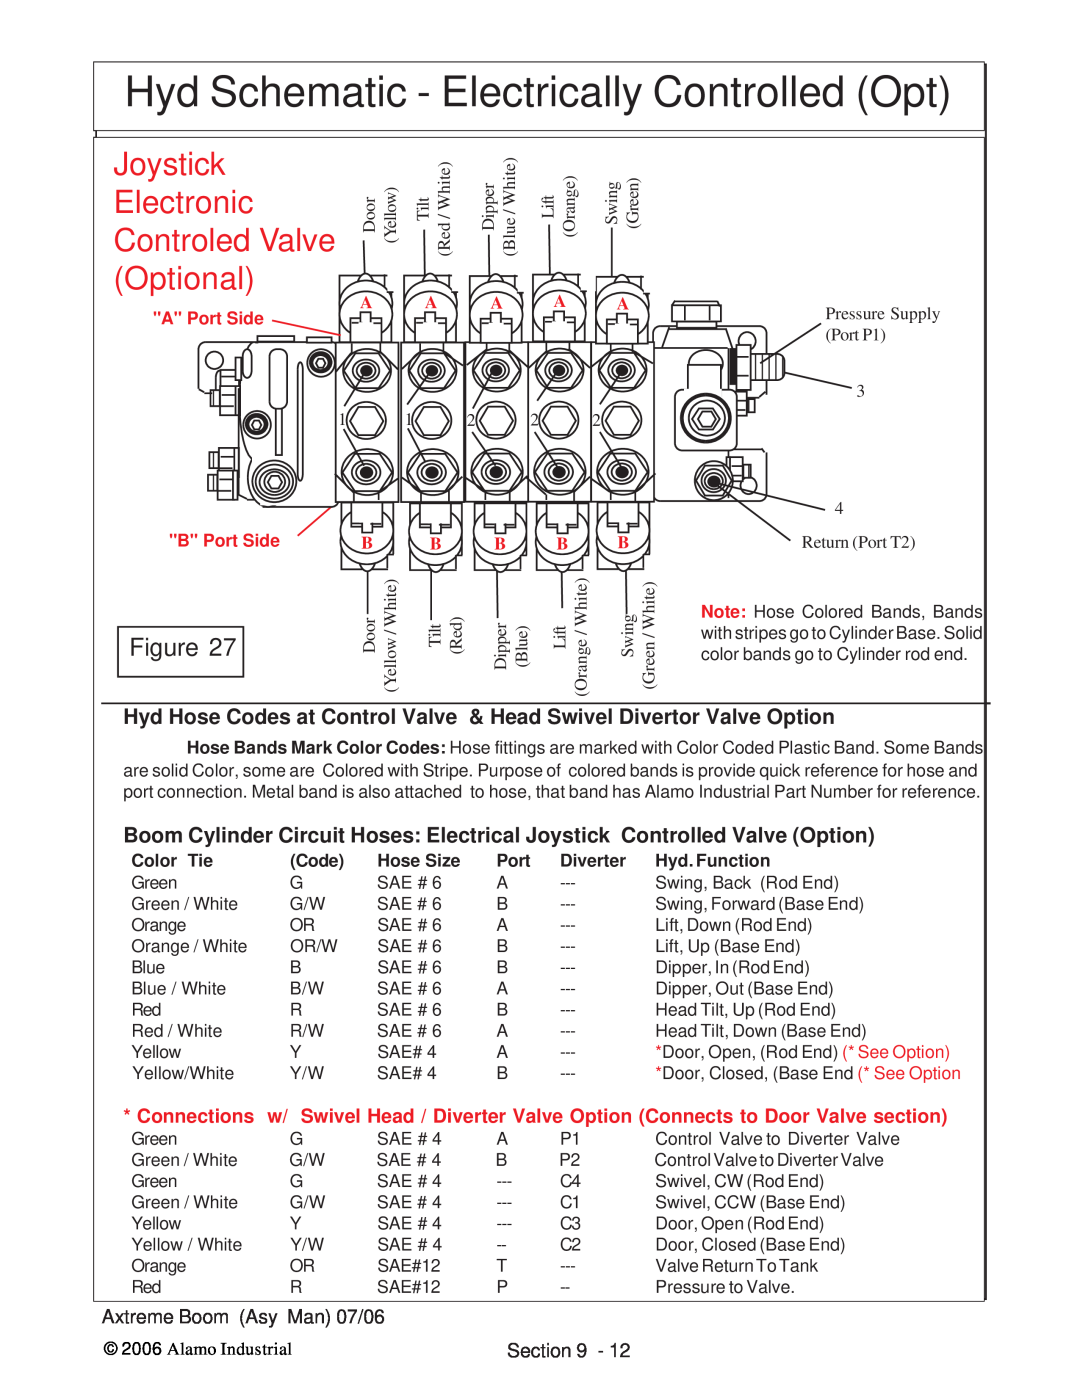 Alamo 02984405 Hyd Schematic - Electrically Controlled Opt, Joystick, Electronic, Optional, Controled Valve, A Port Side 